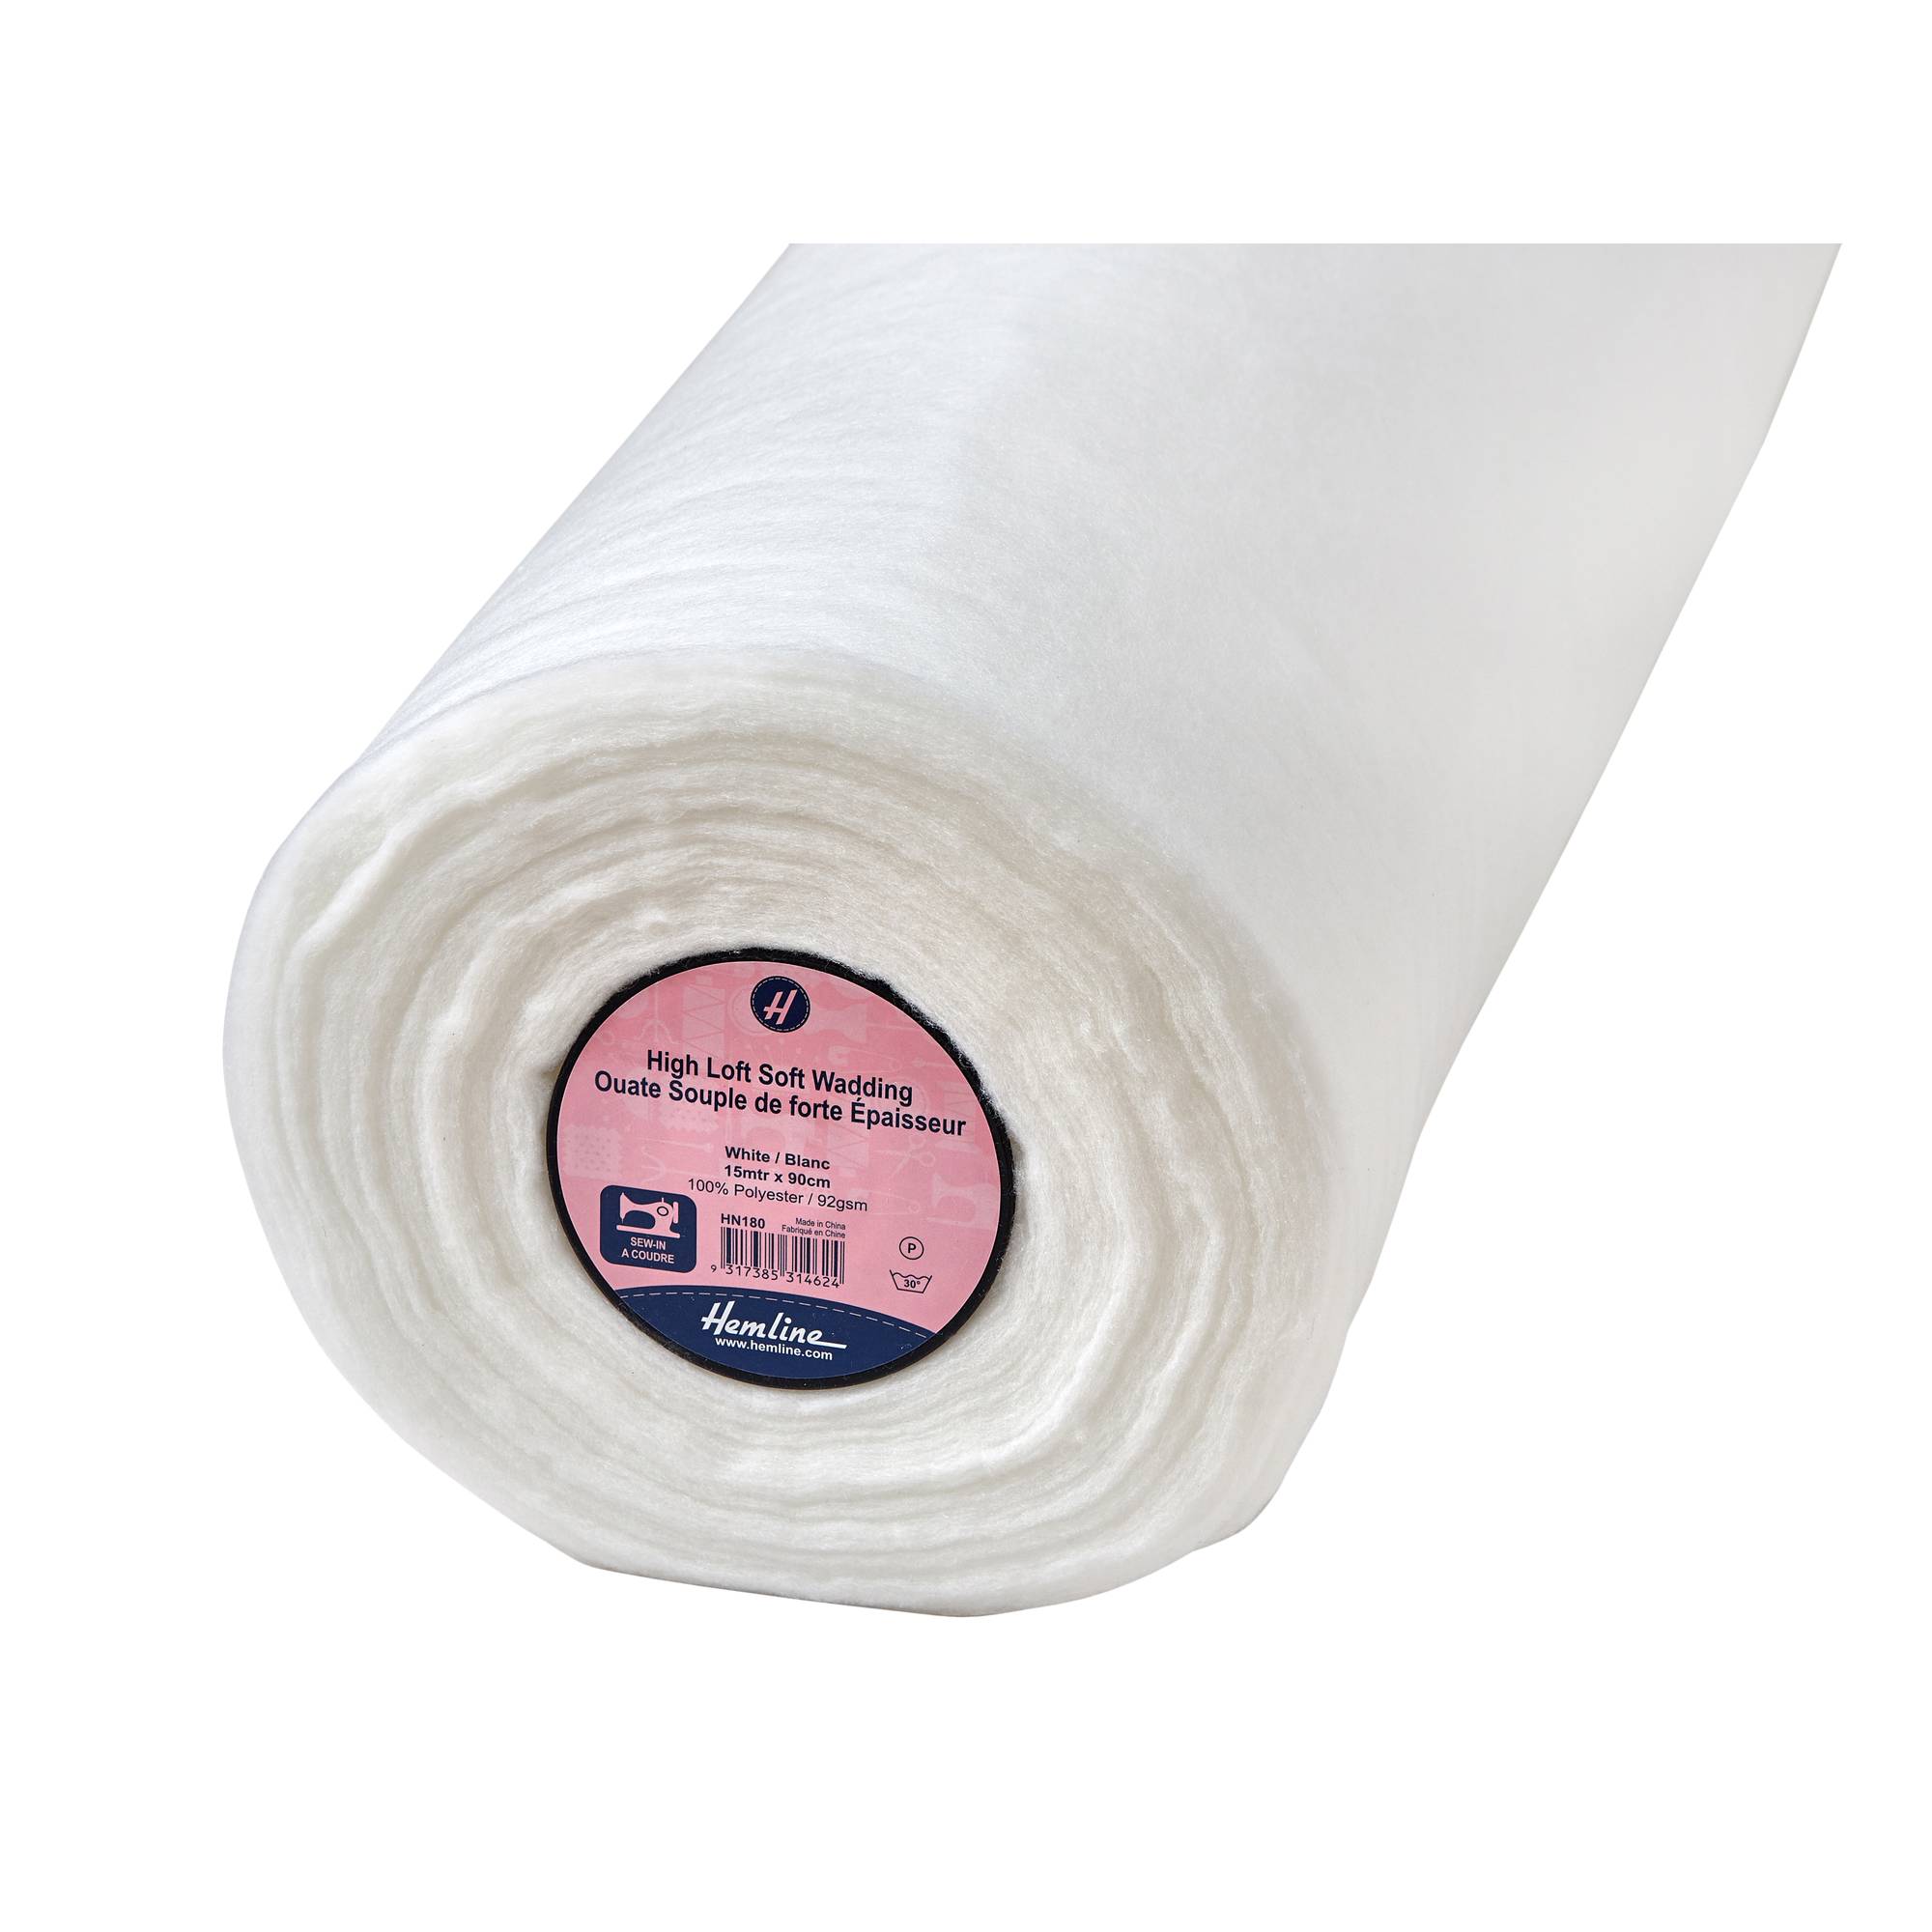 High Quality Washing Polyester Wadding/Batting for Quilt and